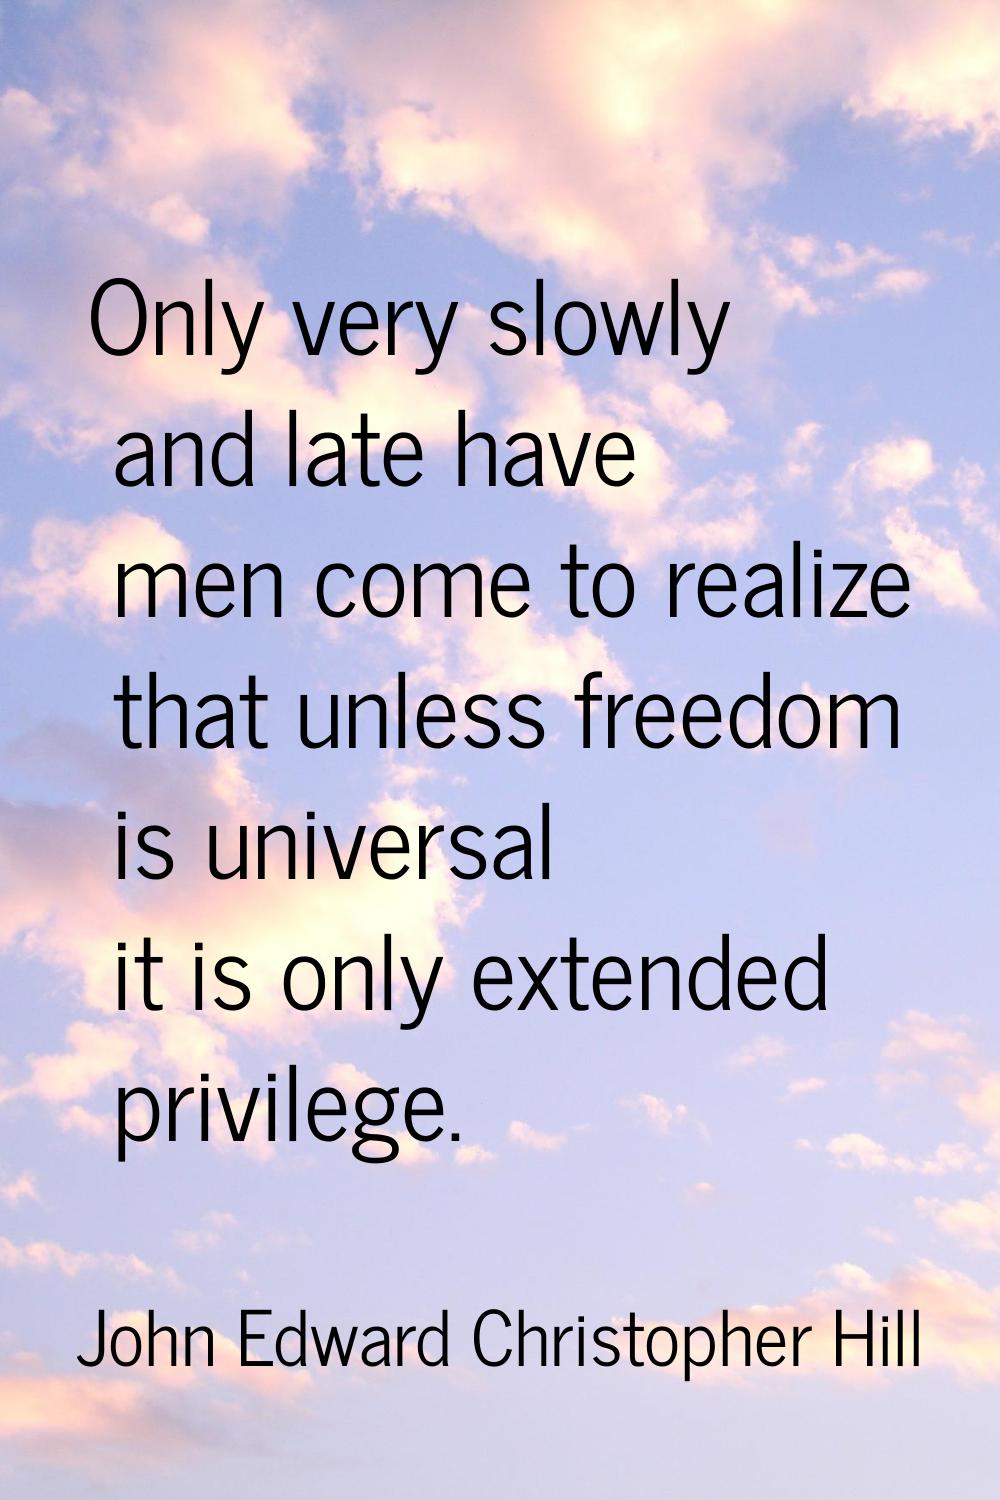 Only very slowly and late have men come to realize that unless freedom is universal it is only exte